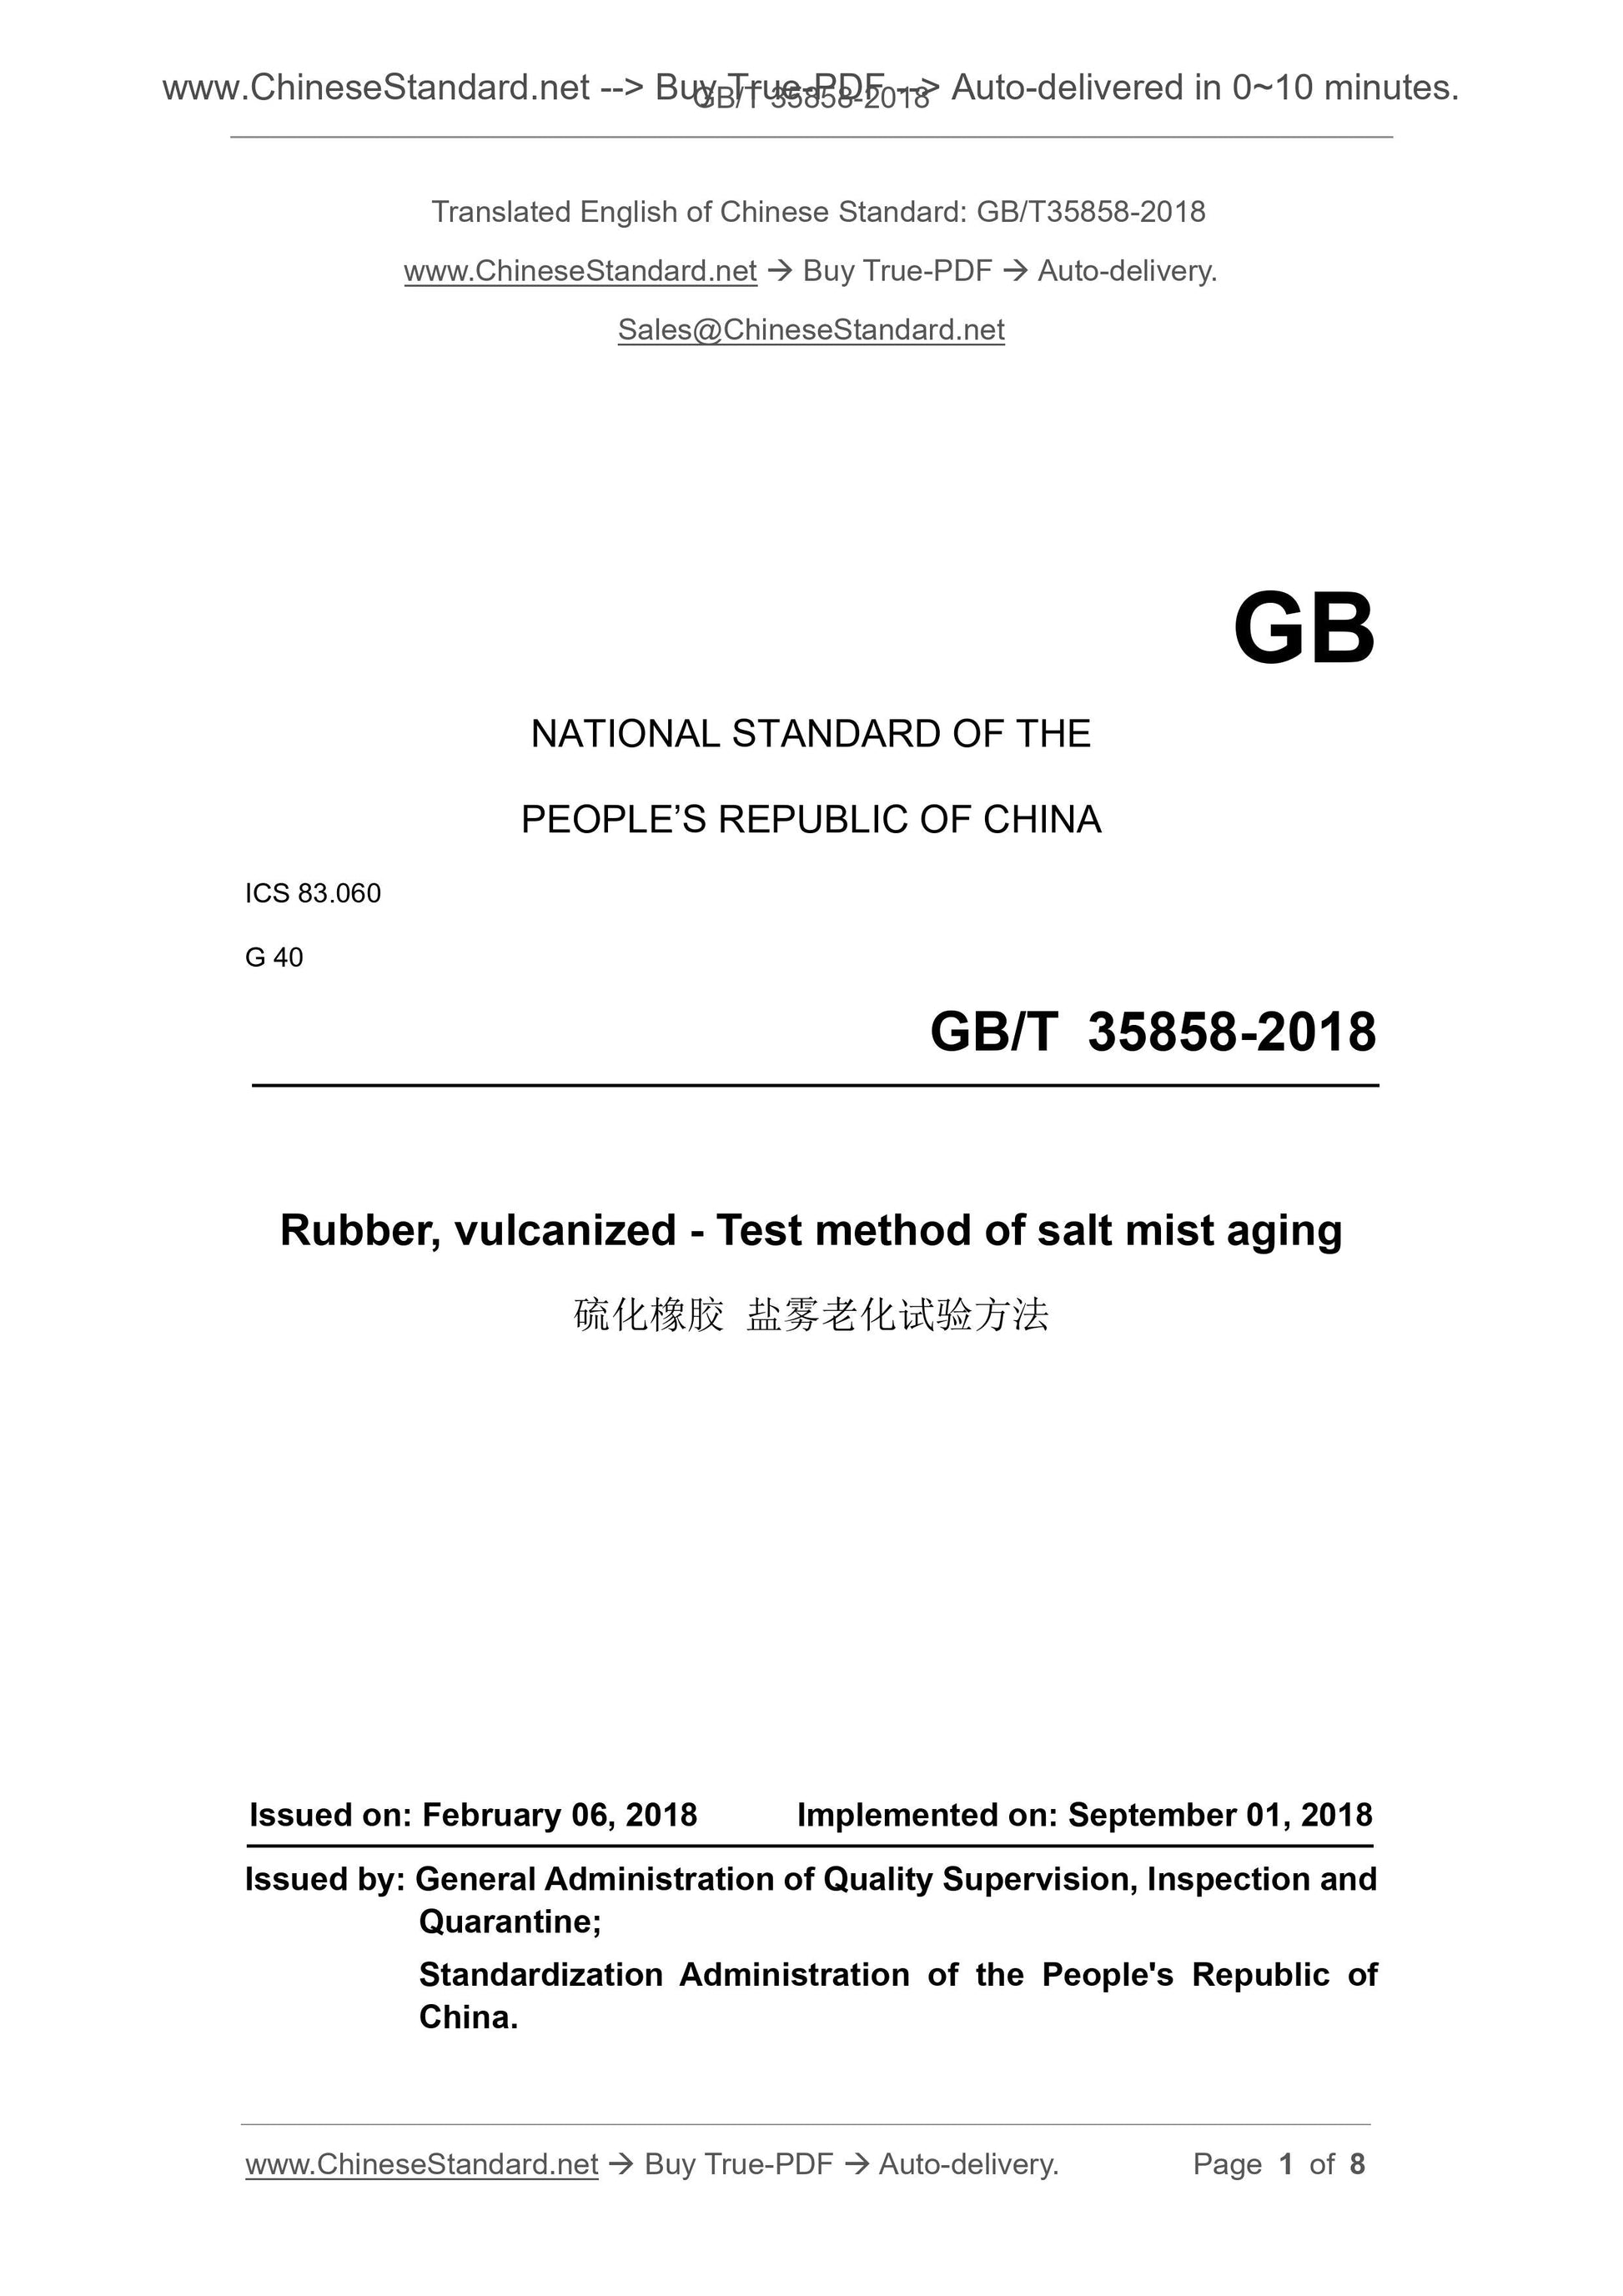 GB/T 35858-2018 Page 1